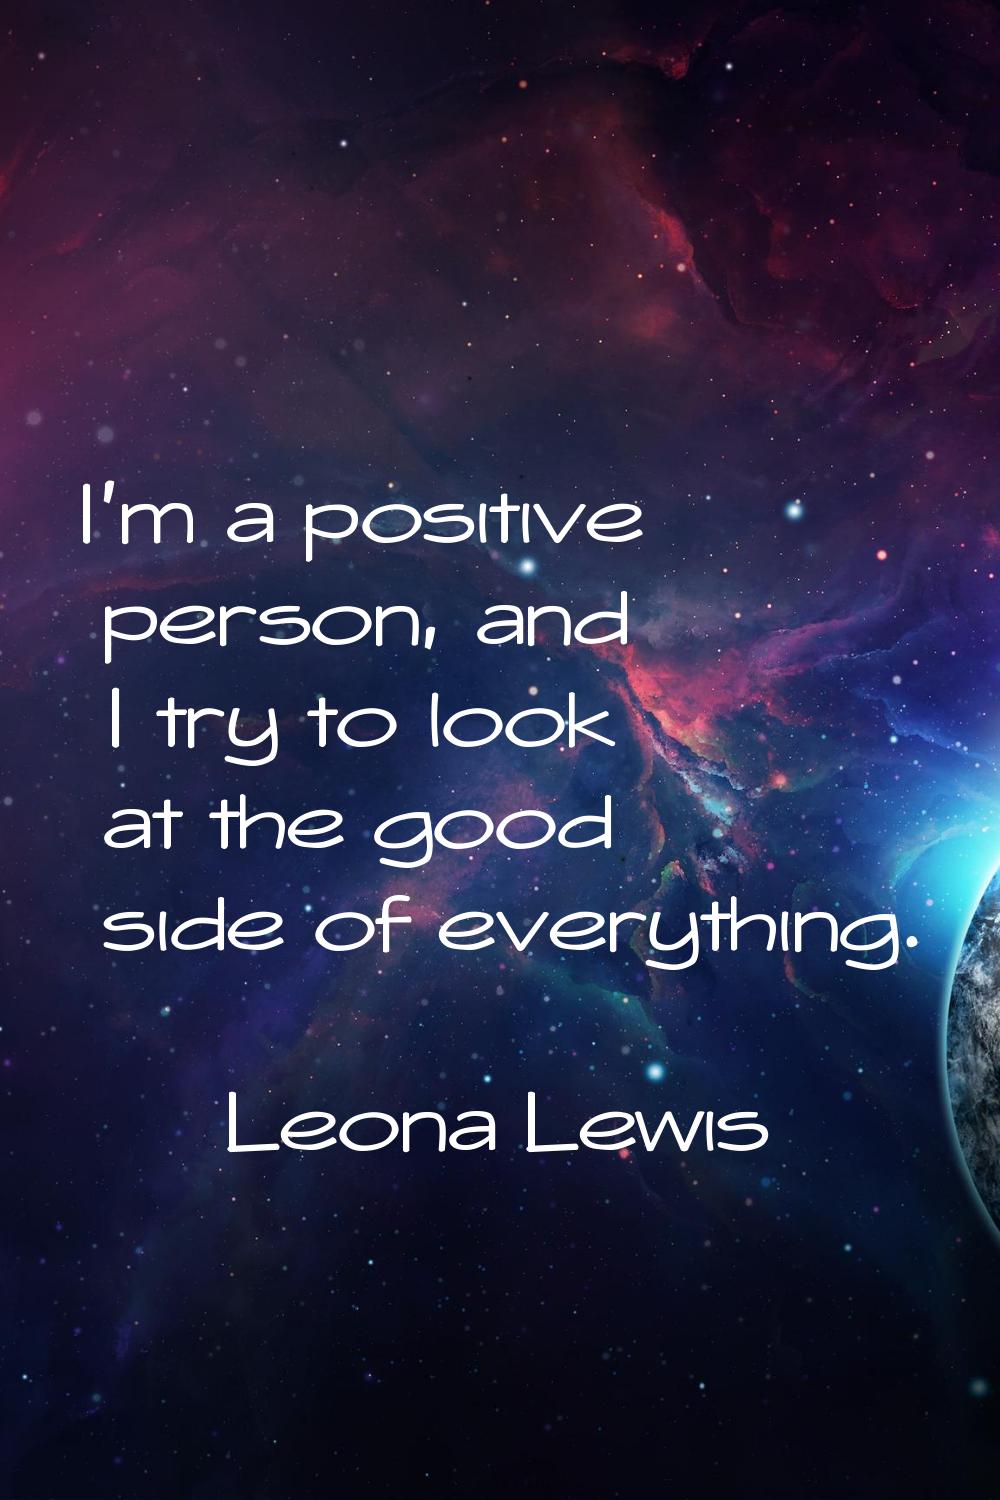 I'm a positive person, and I try to look at the good side of everything.